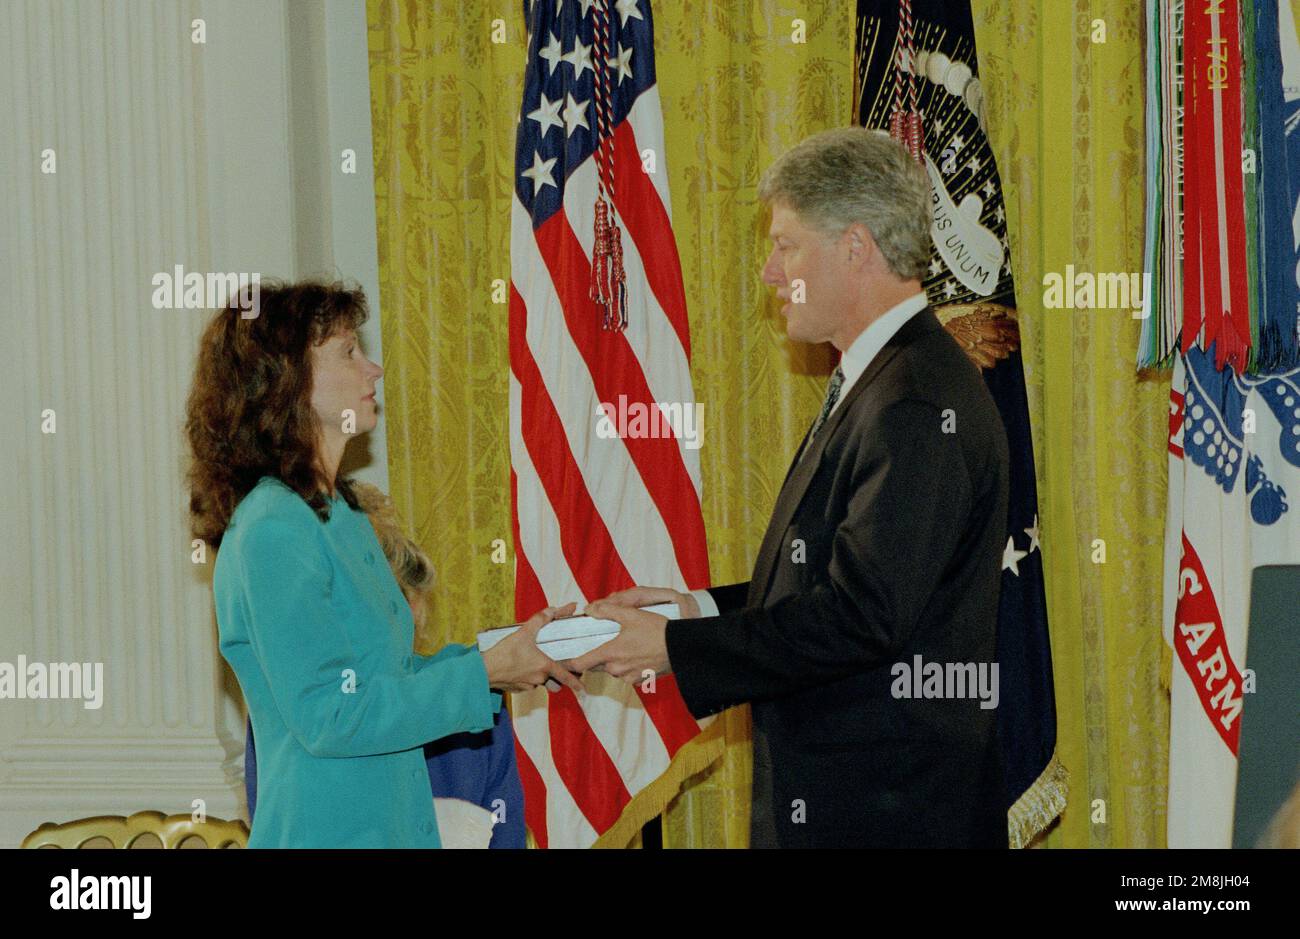 The President of the United States, William J. Clinton presented the nation's highest award for military valor The Medal of Honor (Posthumously) to Stephanie, the widow of Sergeant First Class Randall D. Shughart. SGT Shughart was killed on 03 October 1993, while serving as Sniper Team Member, United States Army Special Operation Command with Task Force Ranger in Mogadishu, Somalia. He and his team leader provided precision sniper fires from the lead helicopter during an assault on a building and at two helicopter crash sites, while subjected to intense automatic weapons and rocket propelled g Stock Photo